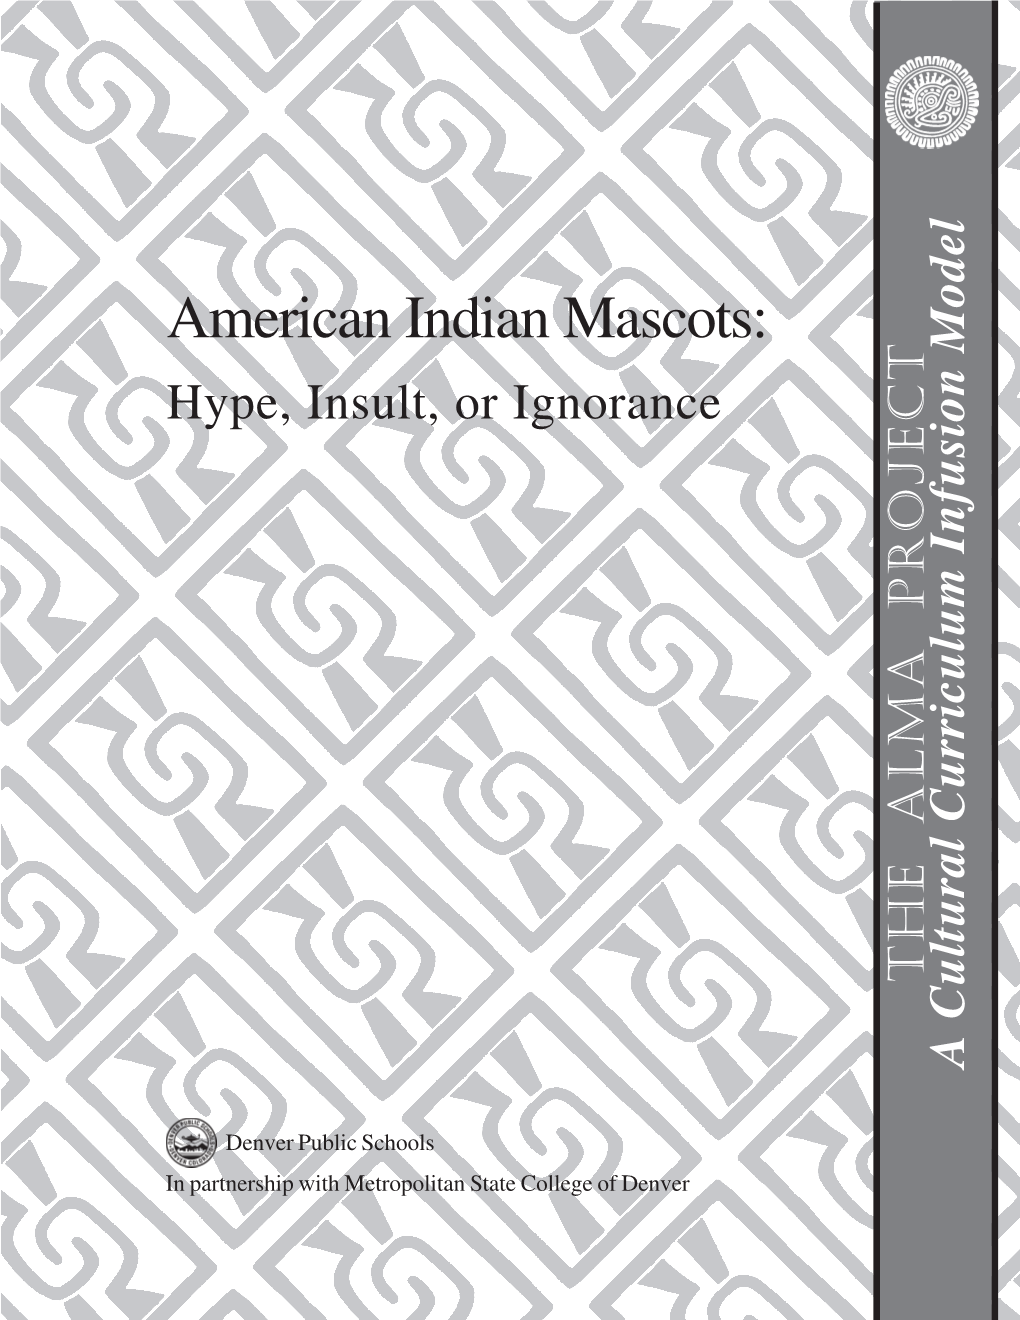 American Indian Mascots: Hype, Insult, Or Ignorance